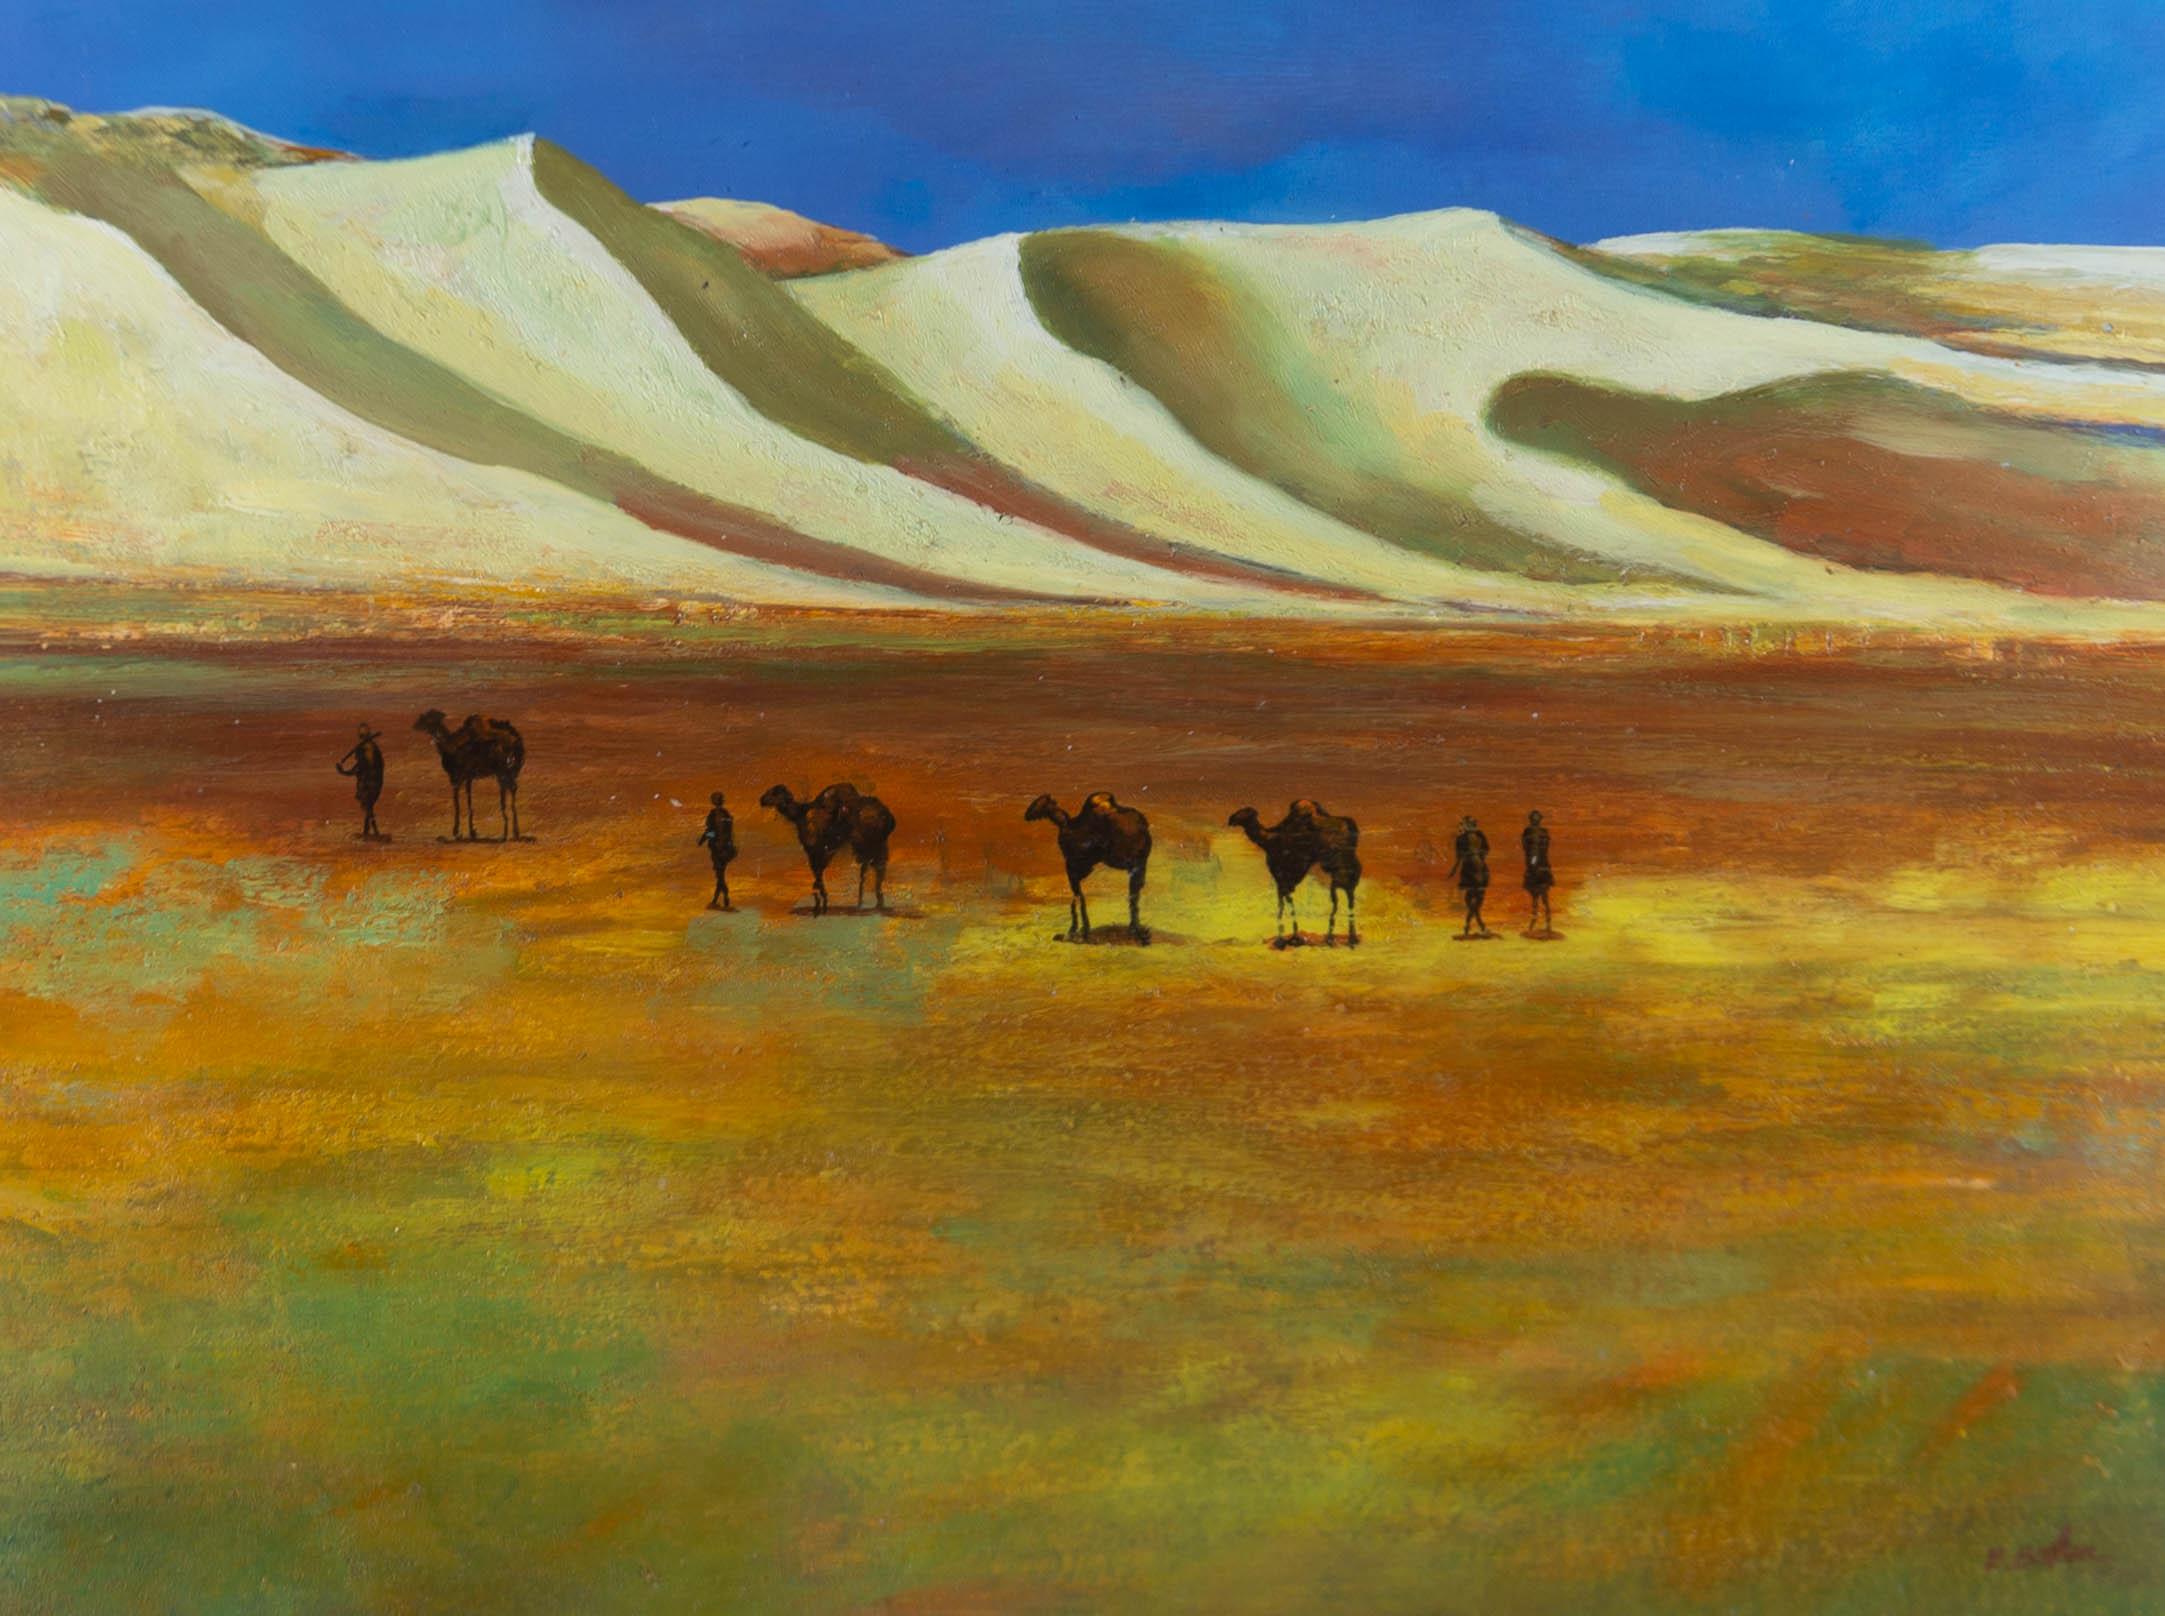 20th Century Acrylic - Desert Landscape with Camels - Painting by Unknown